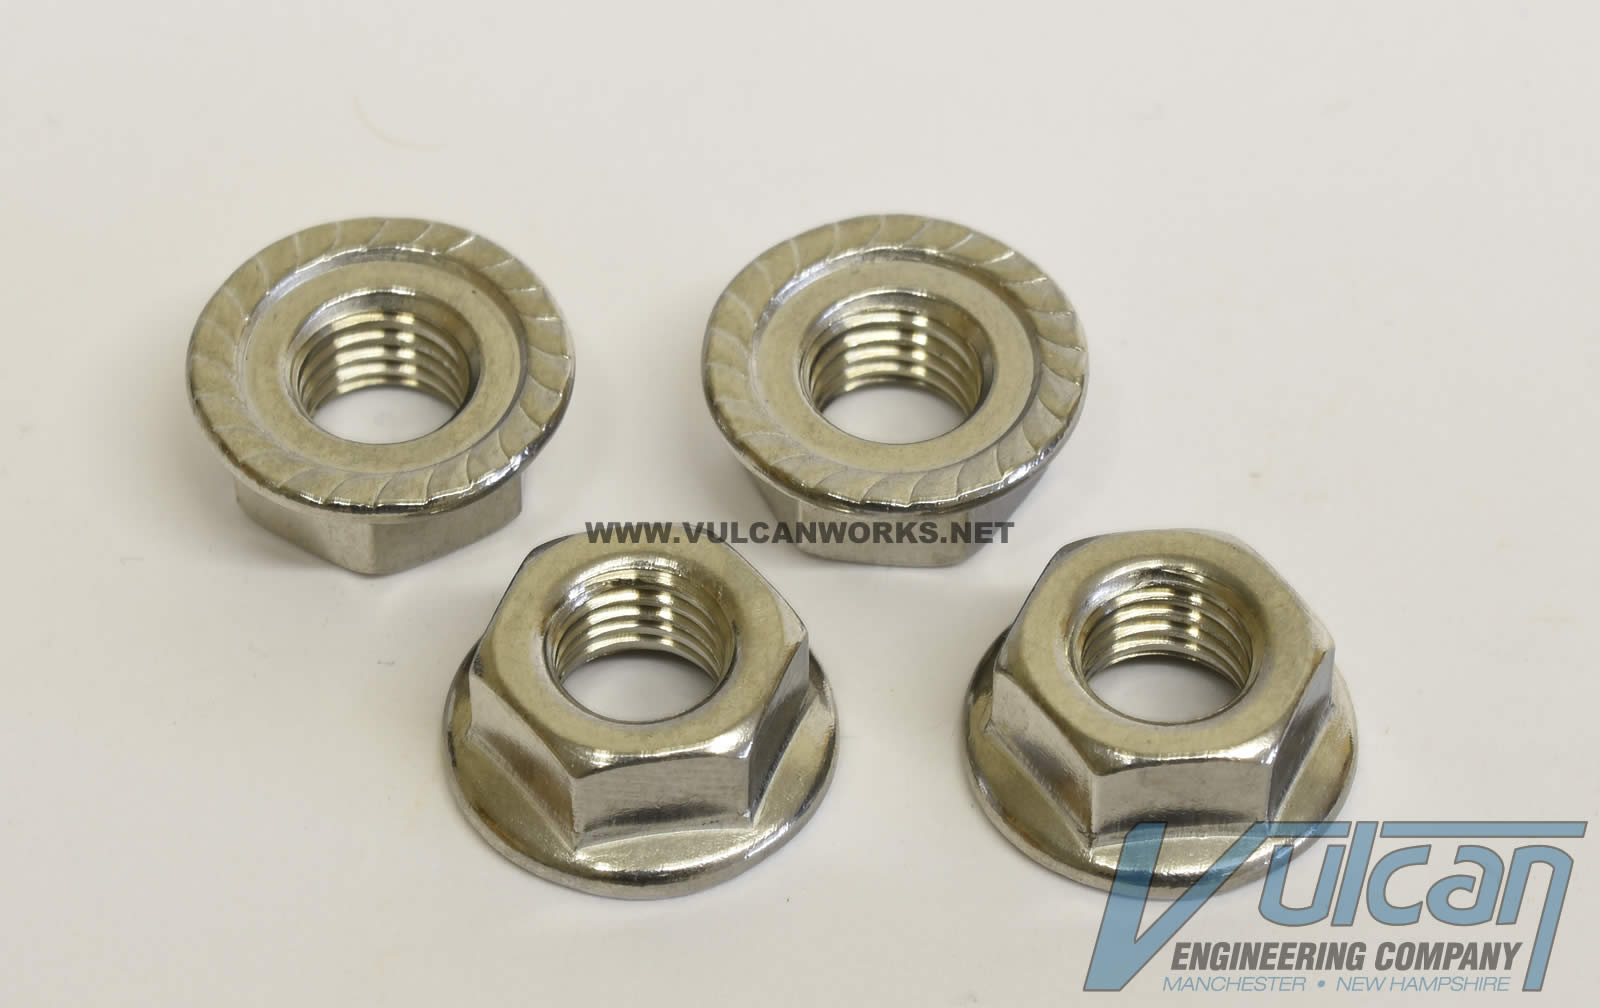 Exhaust Flange Nut Set Stainless Steel Hardware Vulcanworks Net American Made Parts For Harley Davidson Motorcycles